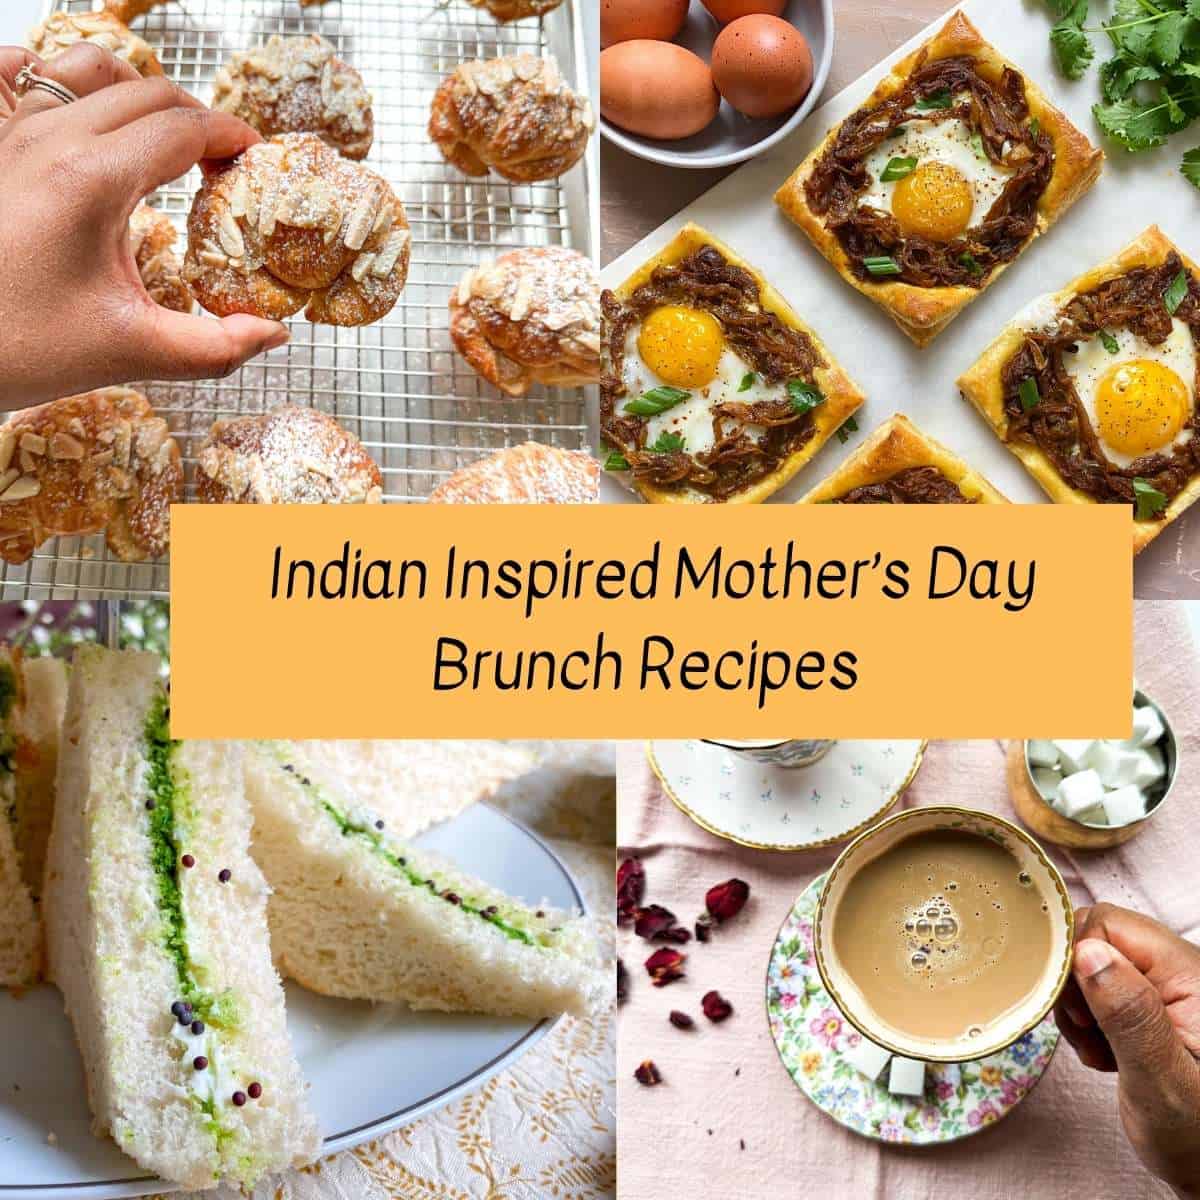 Indian inspired Mother's Day brunch recipes. Four photos of Indian inspired brunch items. Top left is a photo of badam halwa croissants, top right is a photo of caramelized onion masala breakfast tarts, bottom left is a cilantro-mint chutney sandwich, and last on the bottom right is rose chai.